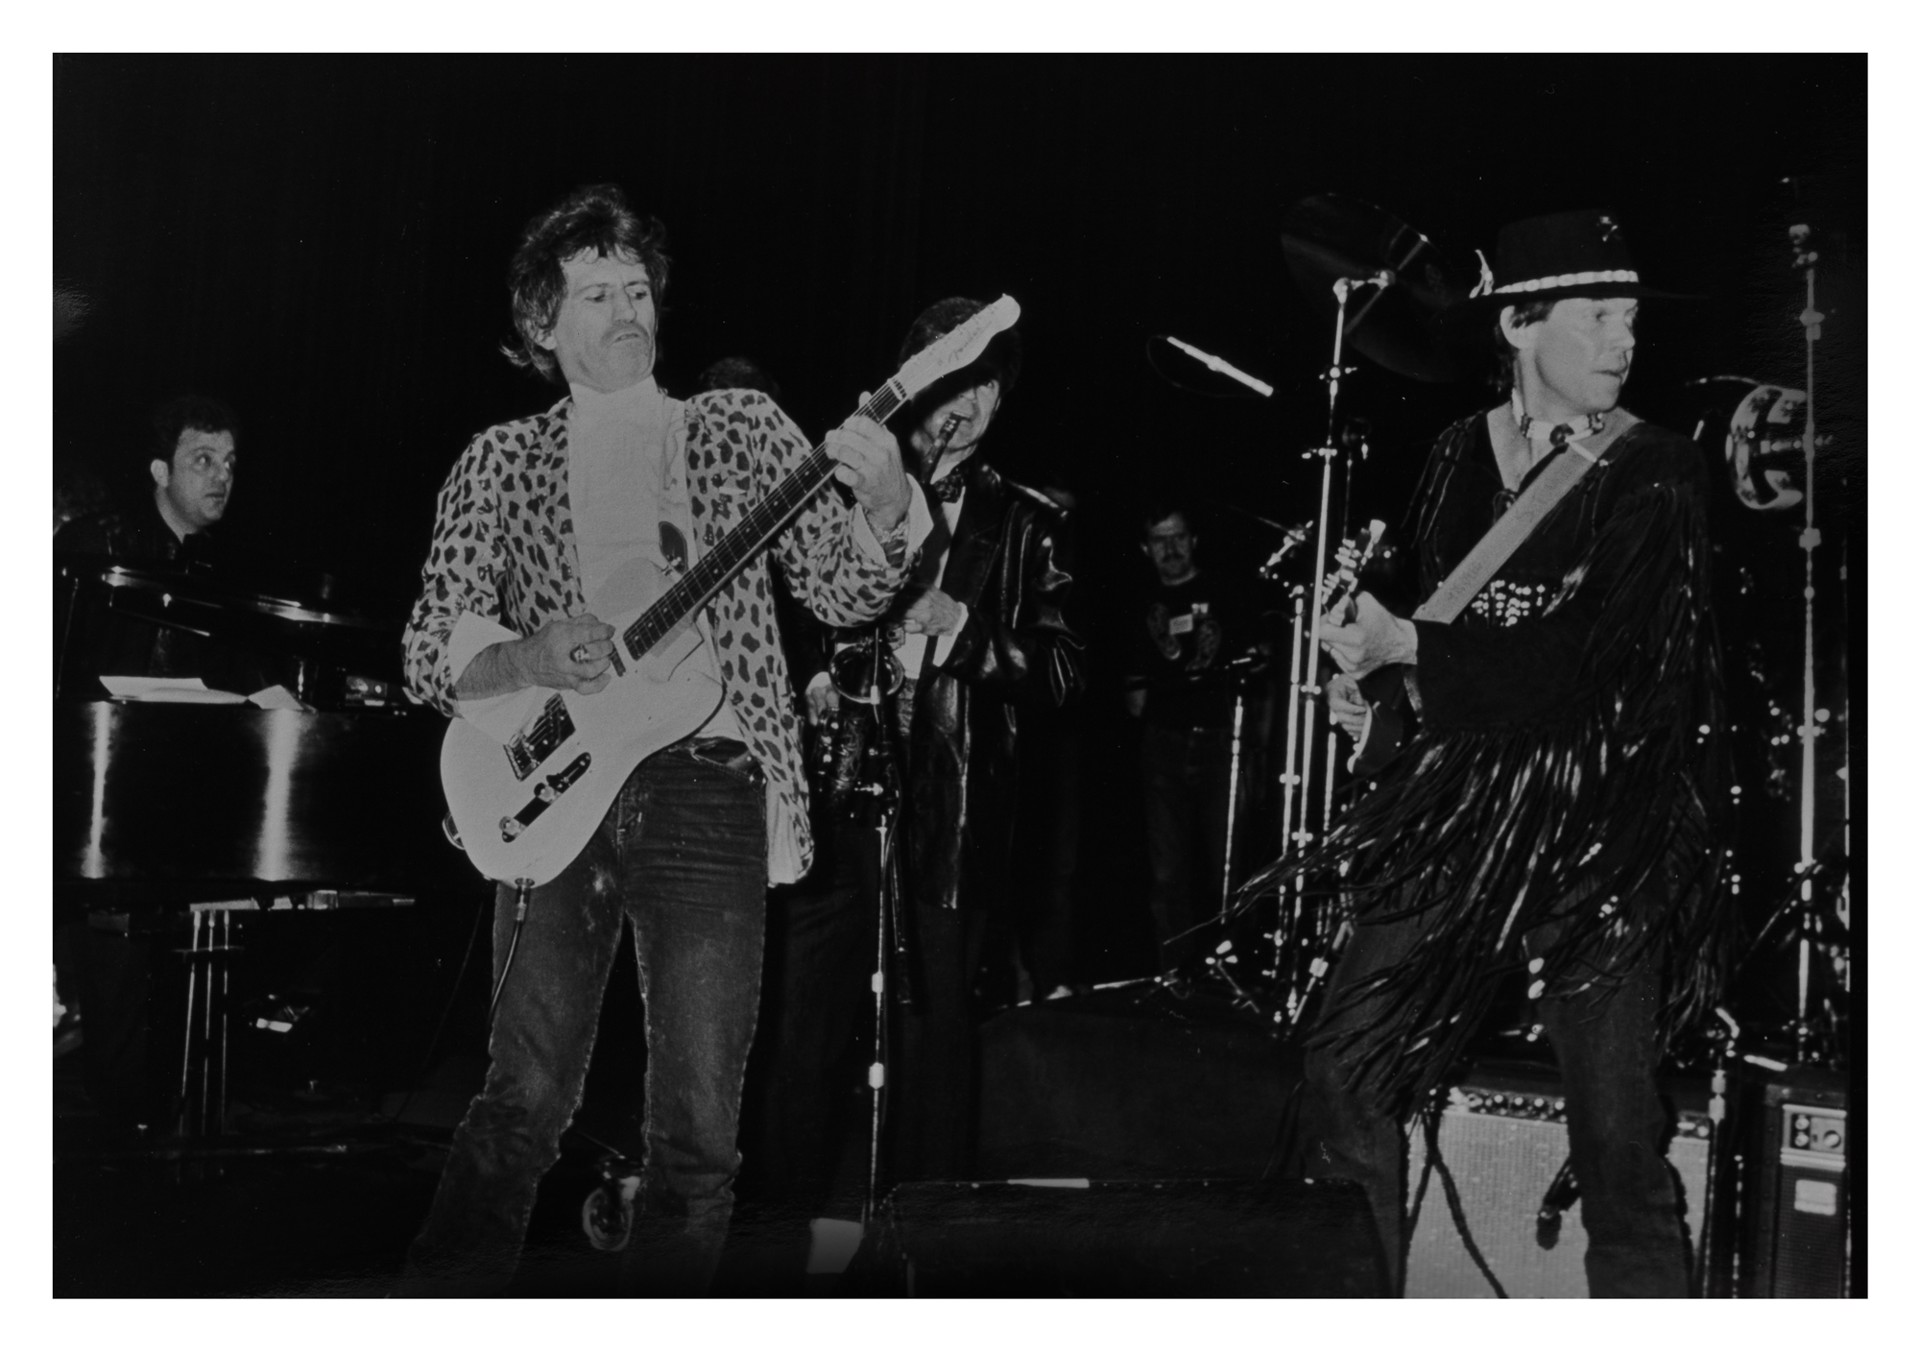 Keith Richards, Billy Joel, and Neil Young by Ron Galella